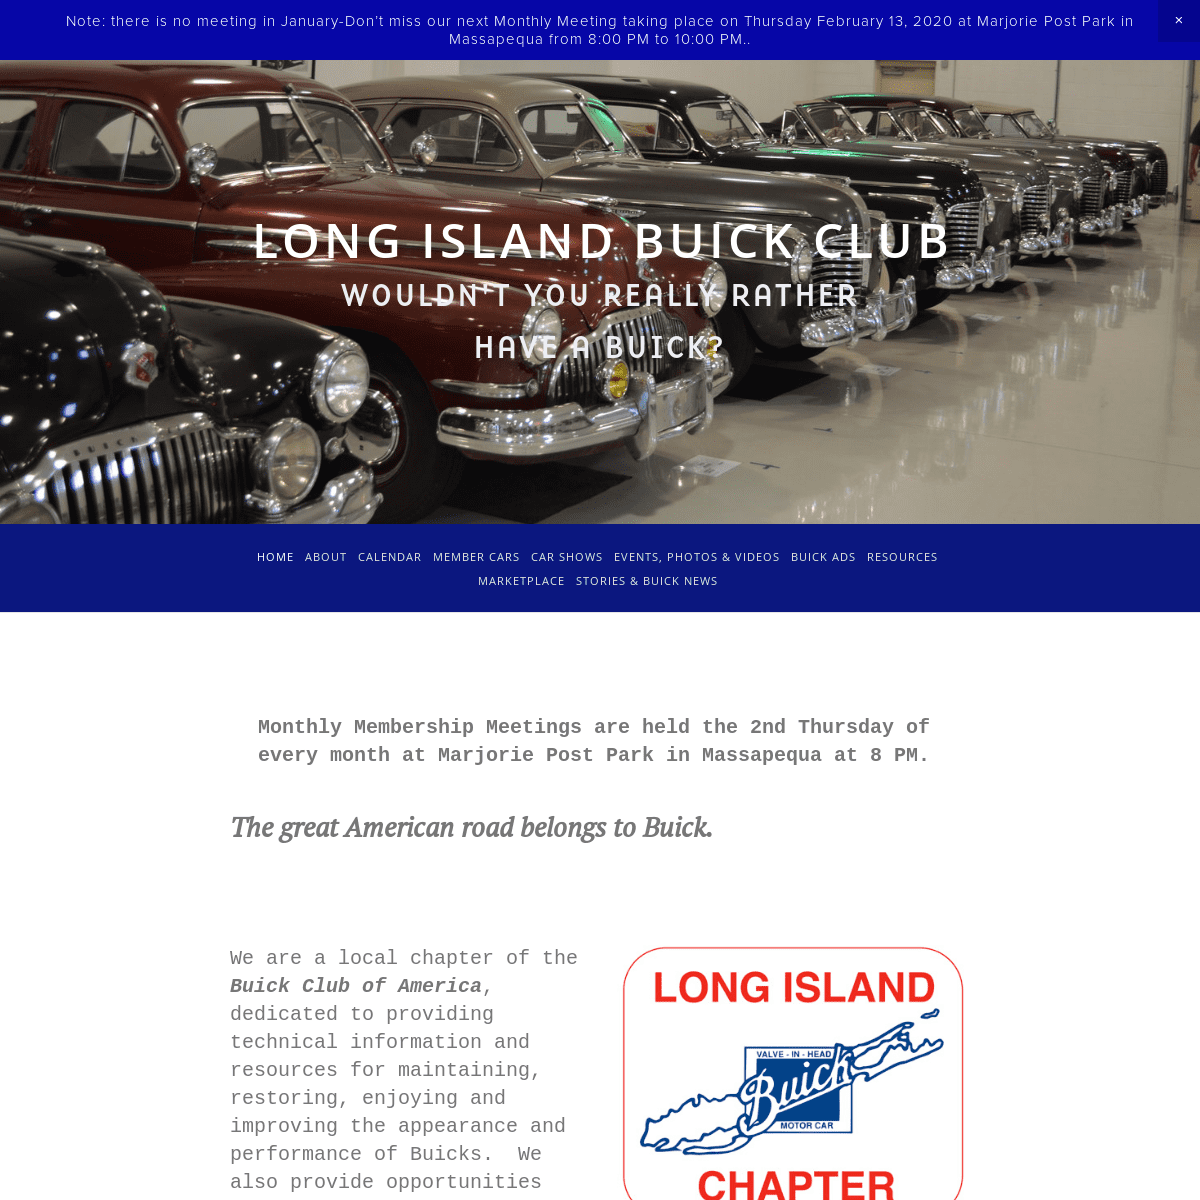 A complete backup of libuickclub.org